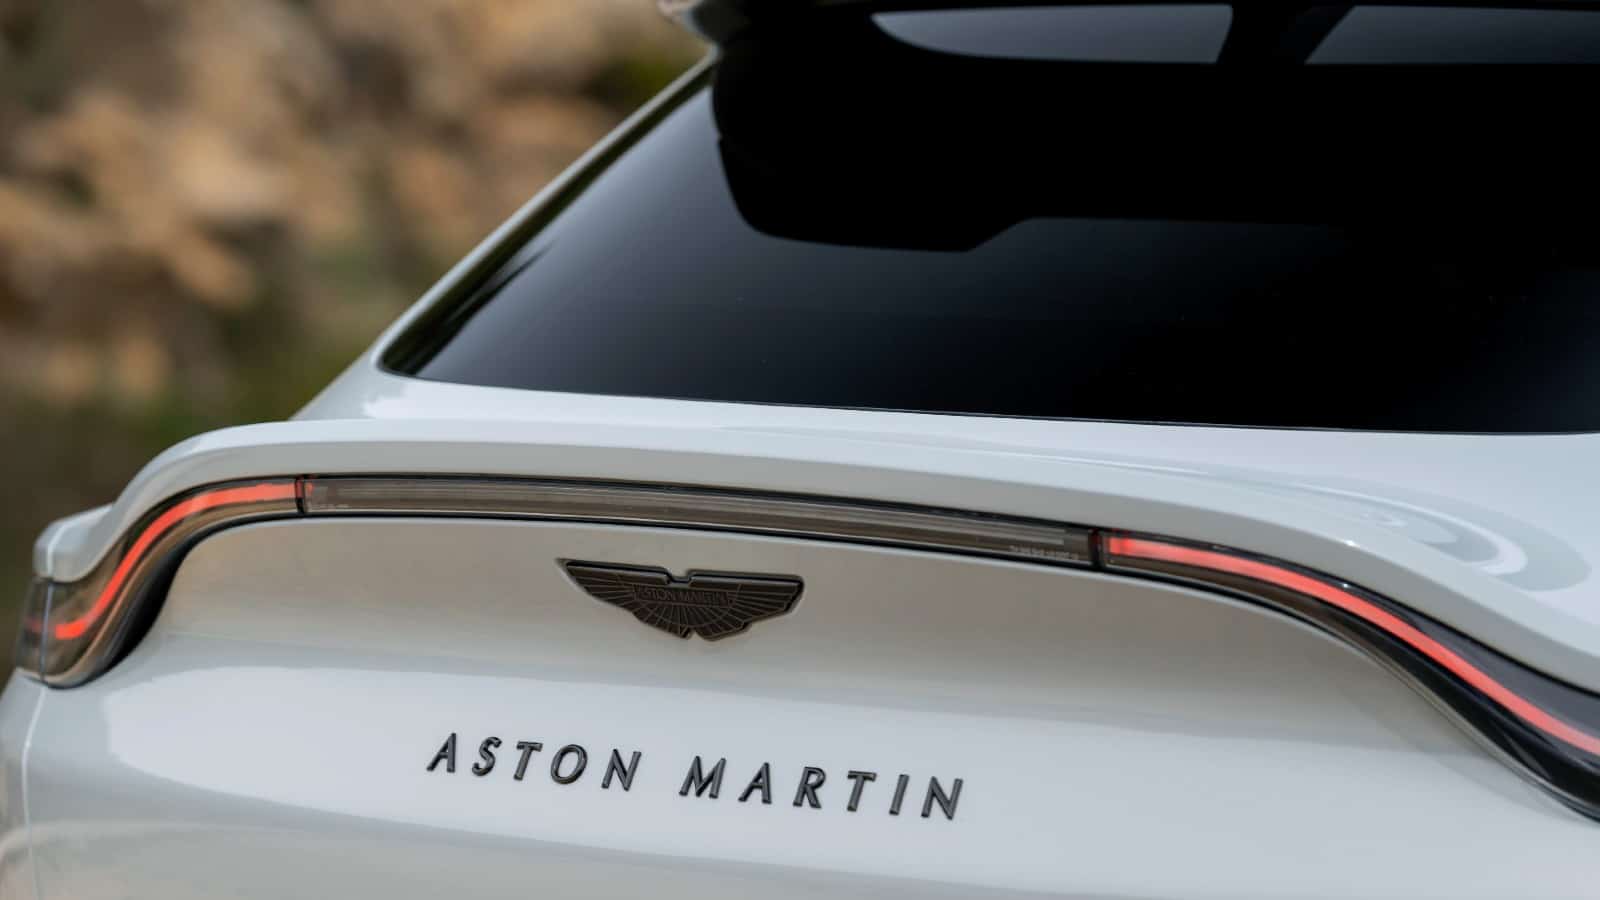 the aston martin share price has halved. time to buy?